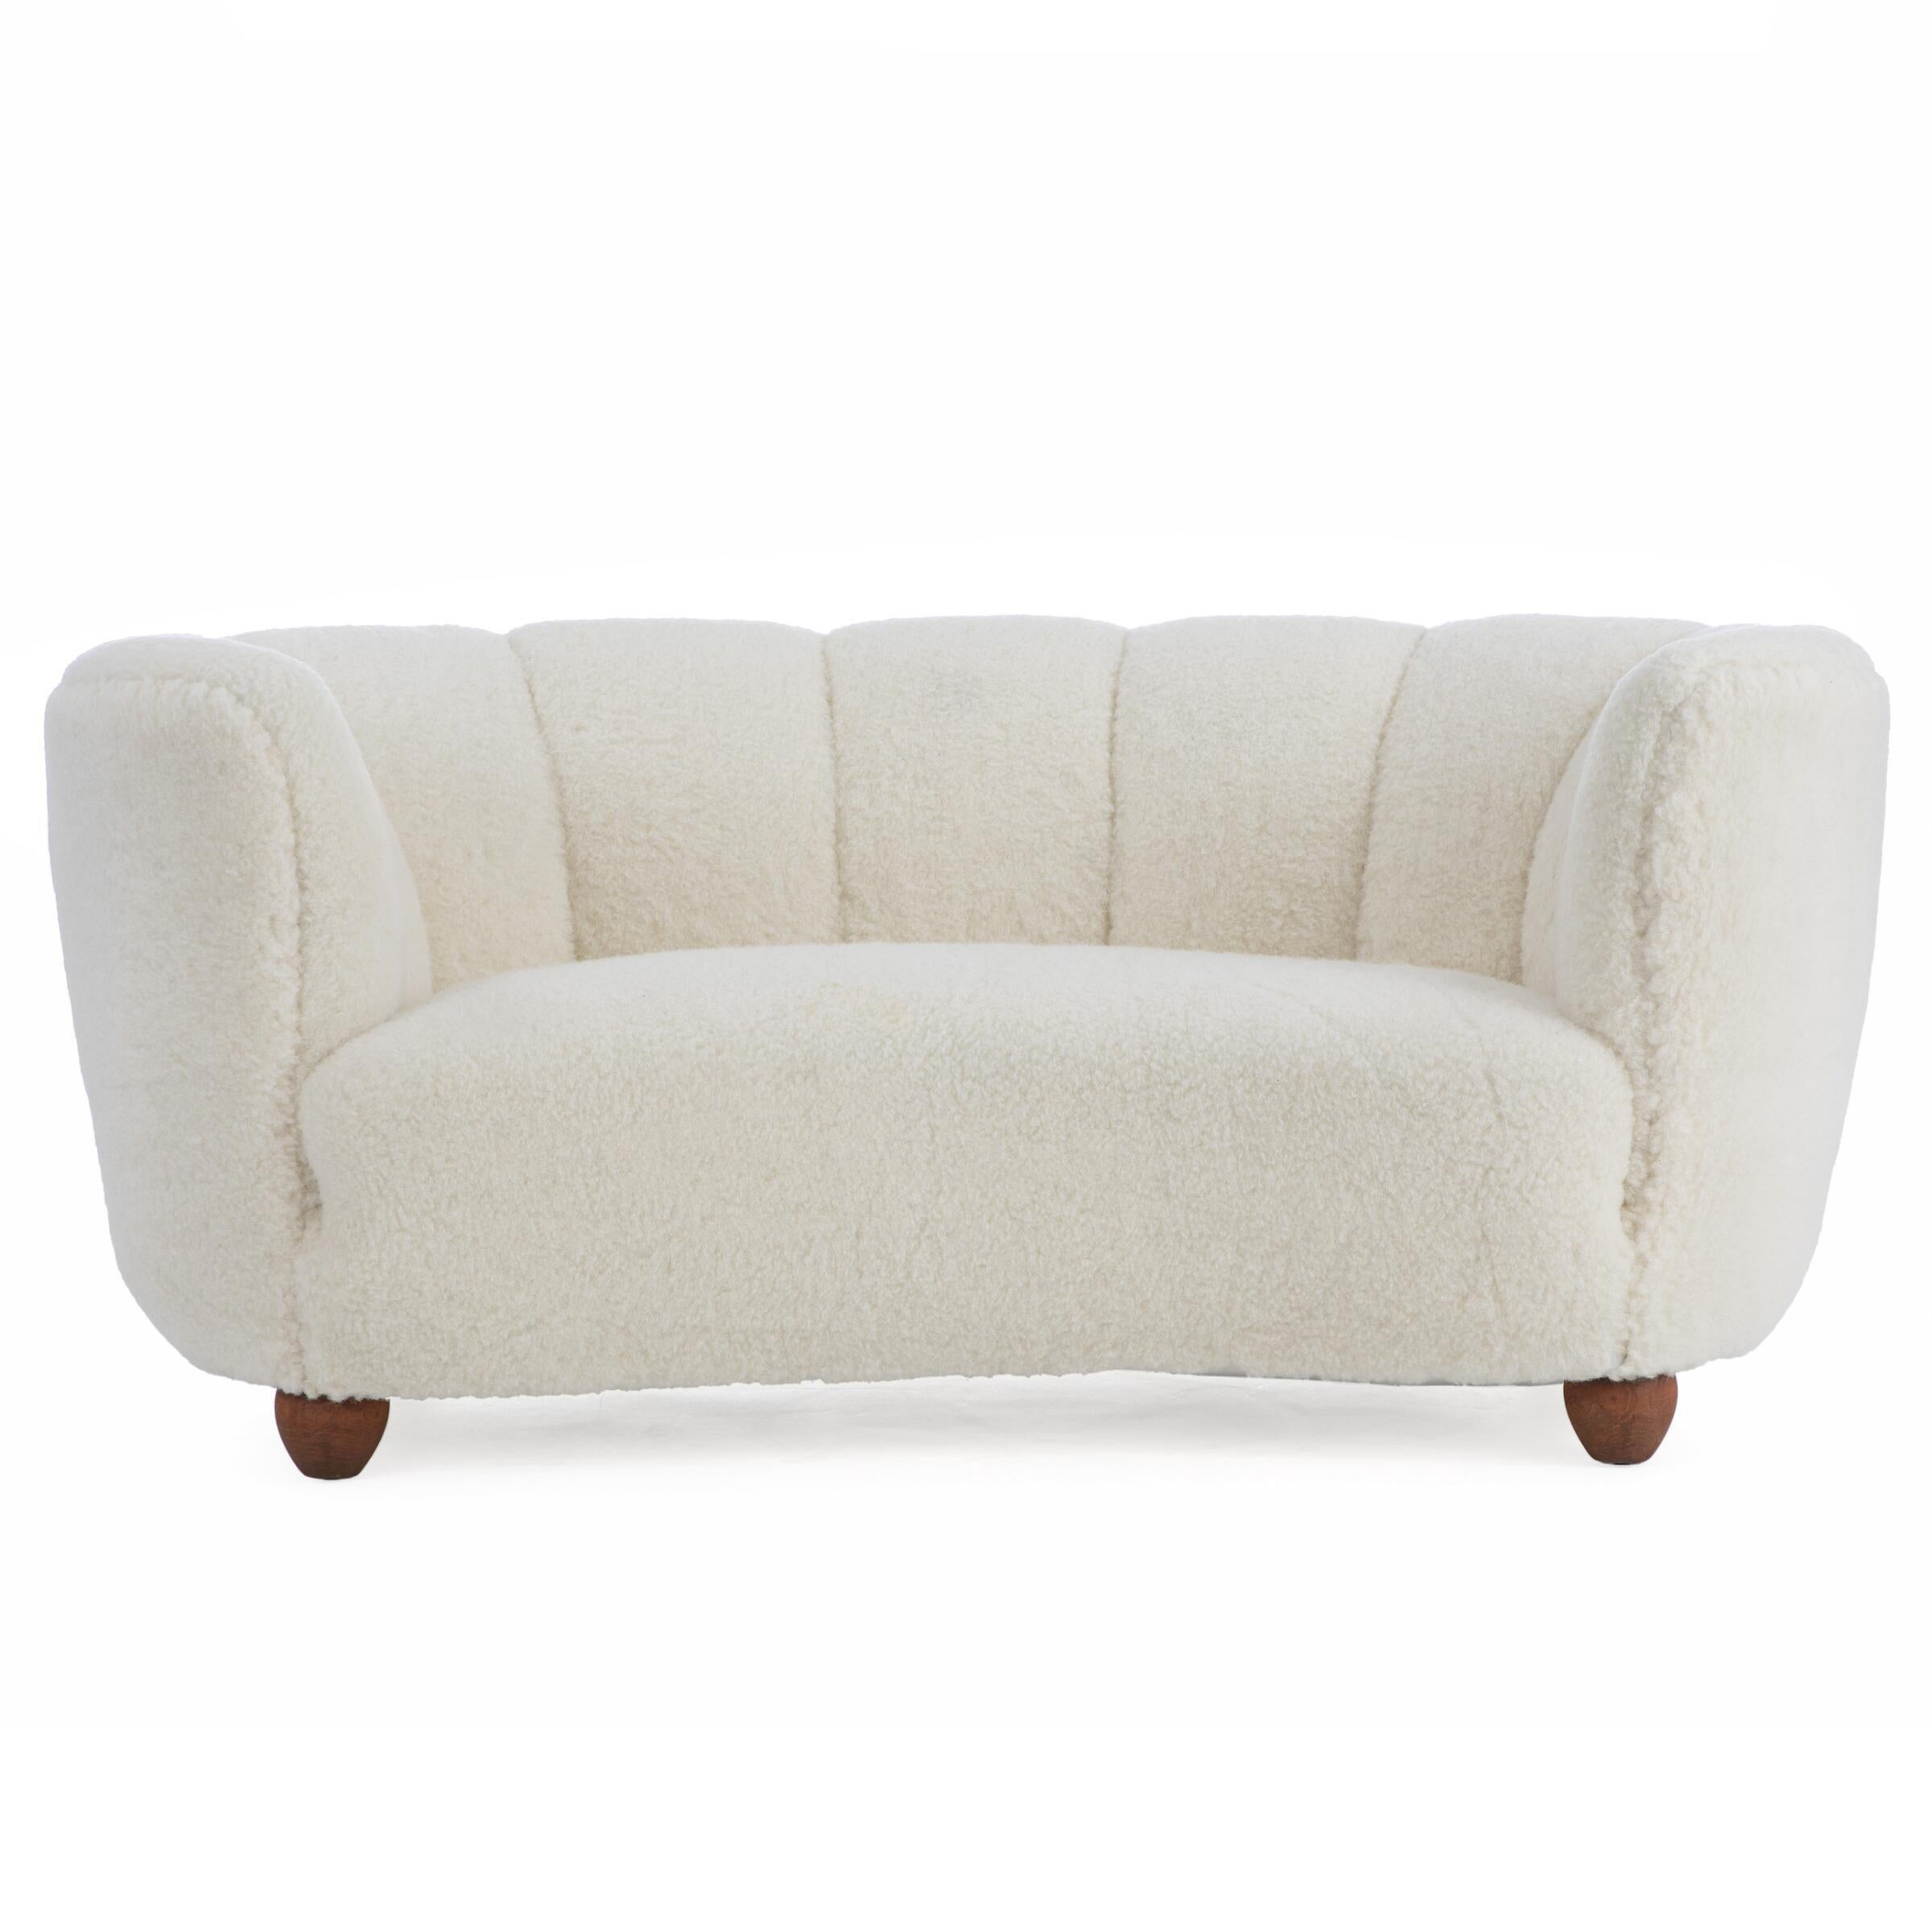 Danish Lambswool Loveseat, Cabinetmaker, 1930s In Good Condition For Sale In Los Gatos, CA